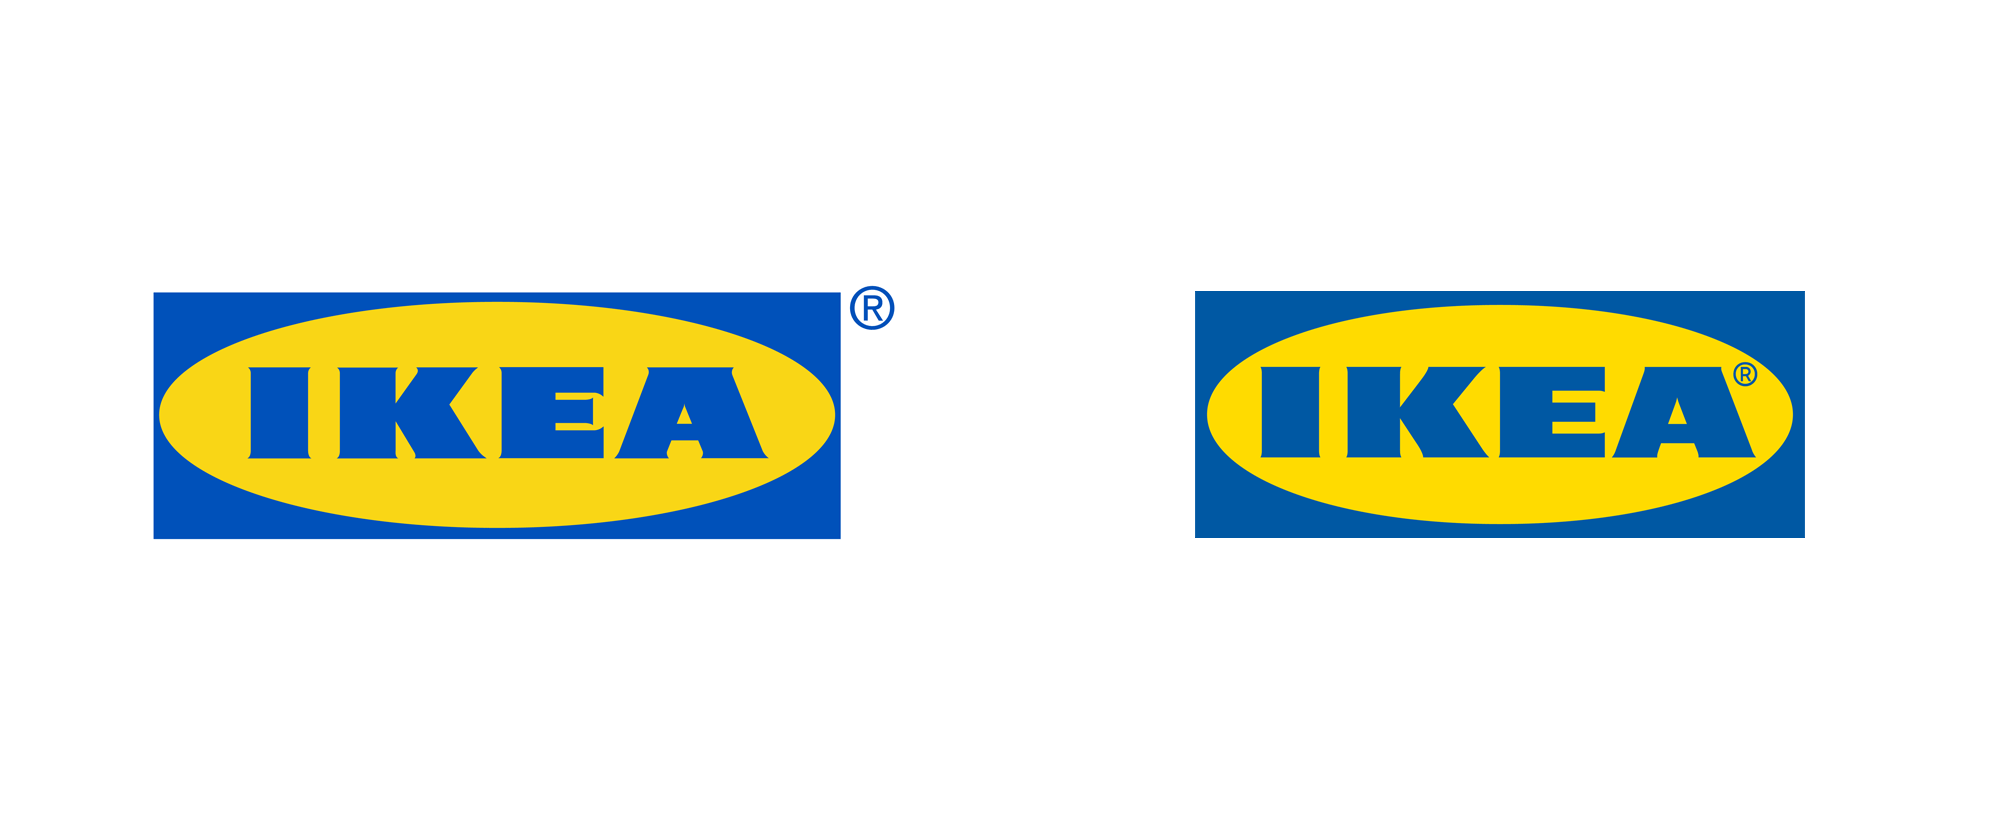 Brand New New Logo For Ikea By Seventy Agency And 72andsunny Amsterdam